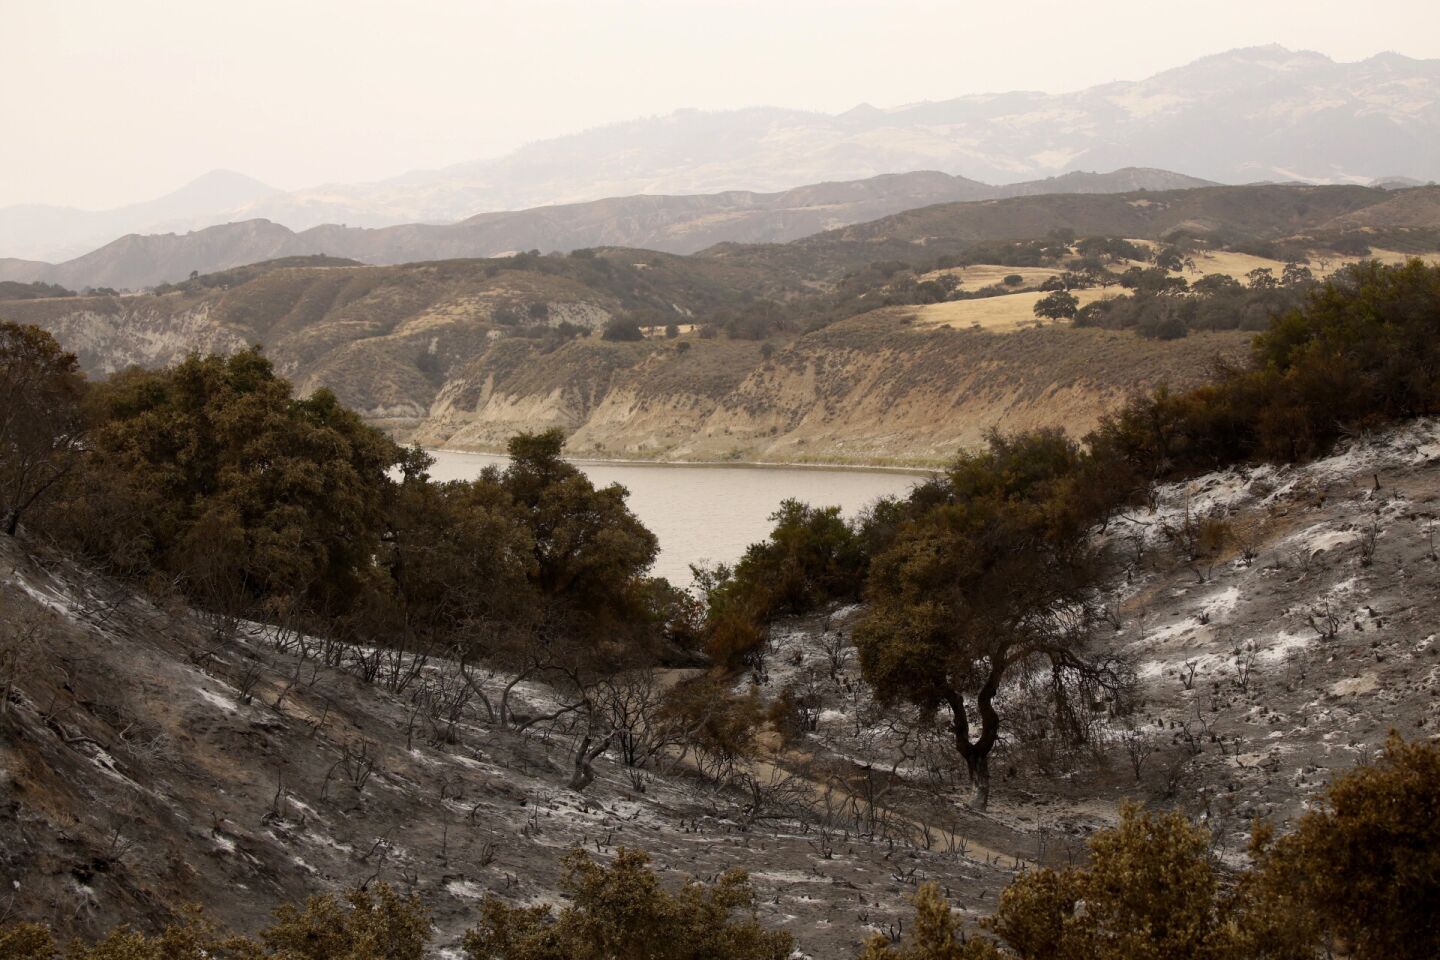 Lake Cachuma is the backdrop for the gray ashen landscape as the Whittier fire continues to burn on the western flank on the north side of the Santa Ynez Mountains Monday afternoon along State Highway 154 in the Santa Ynez Valley.